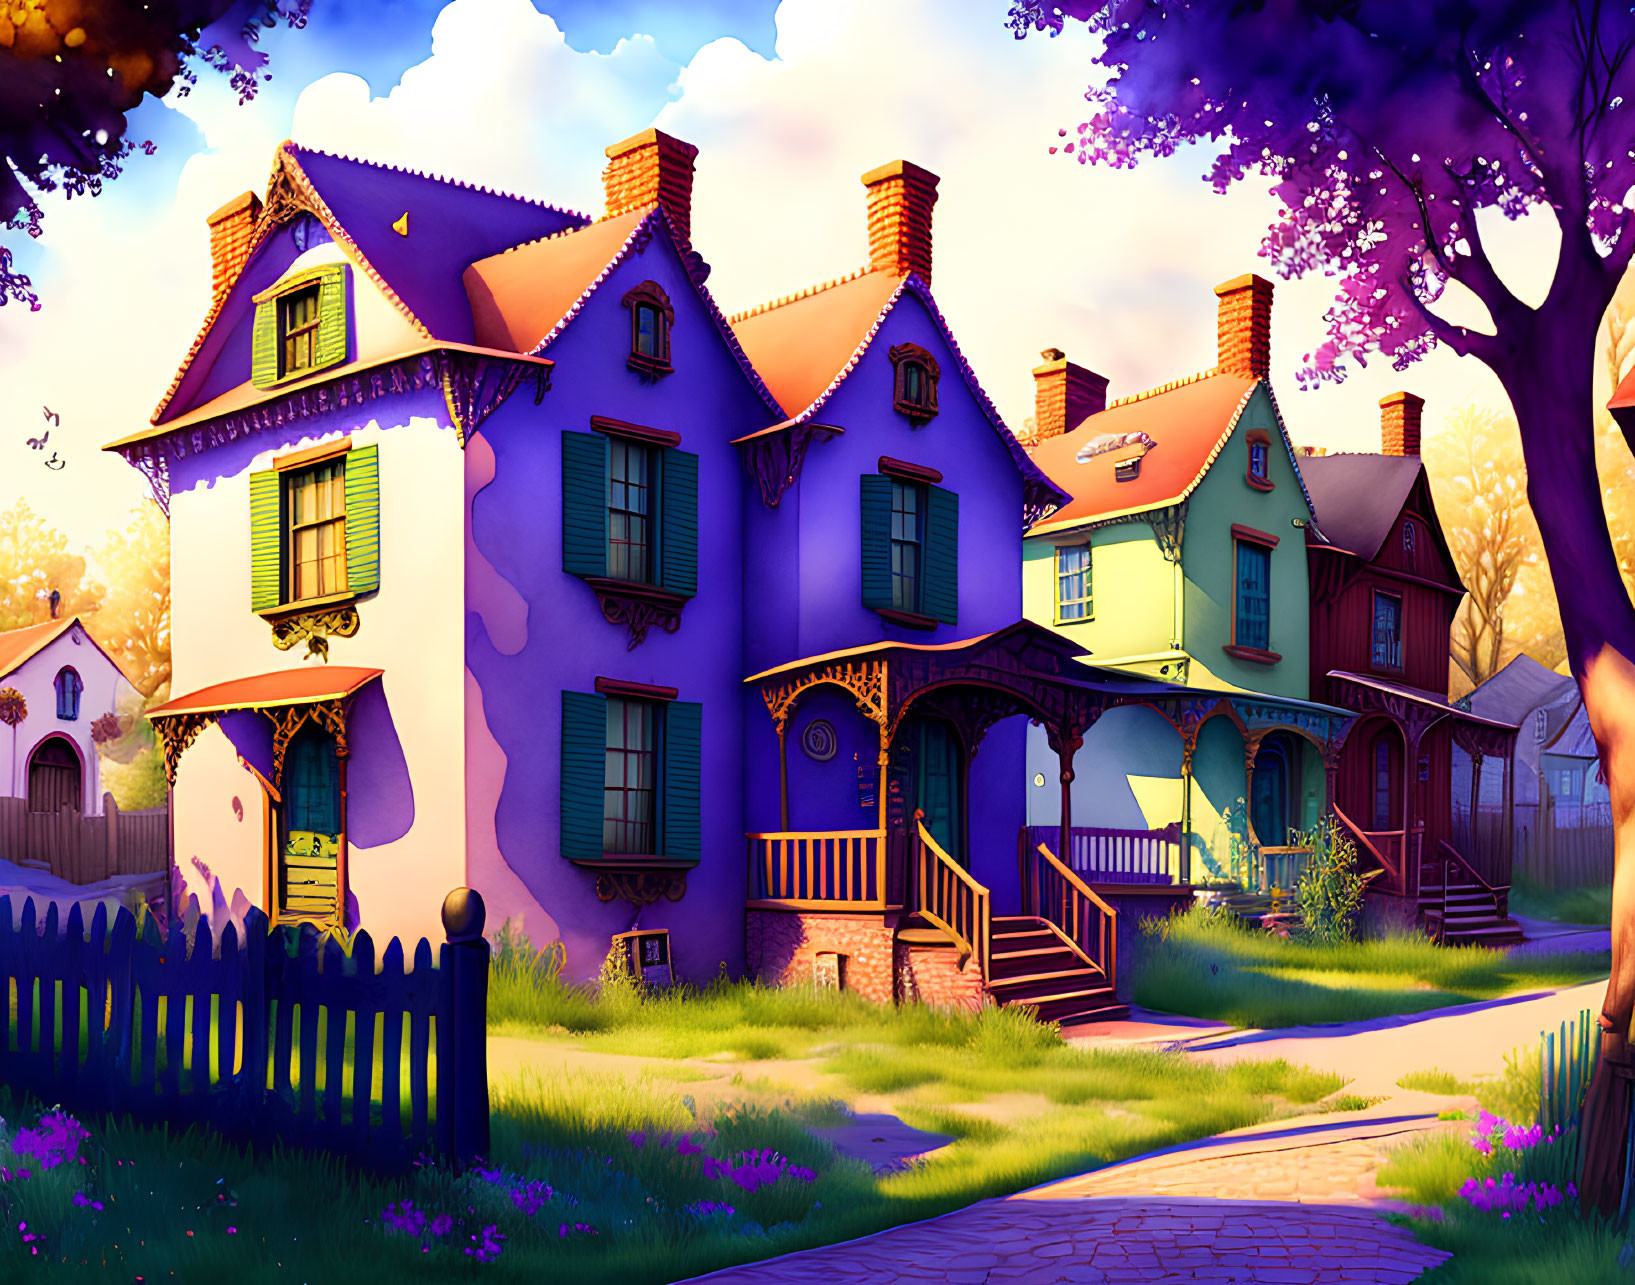 Purple Victorian House with Yellow Trim in Lush Sunset Setting